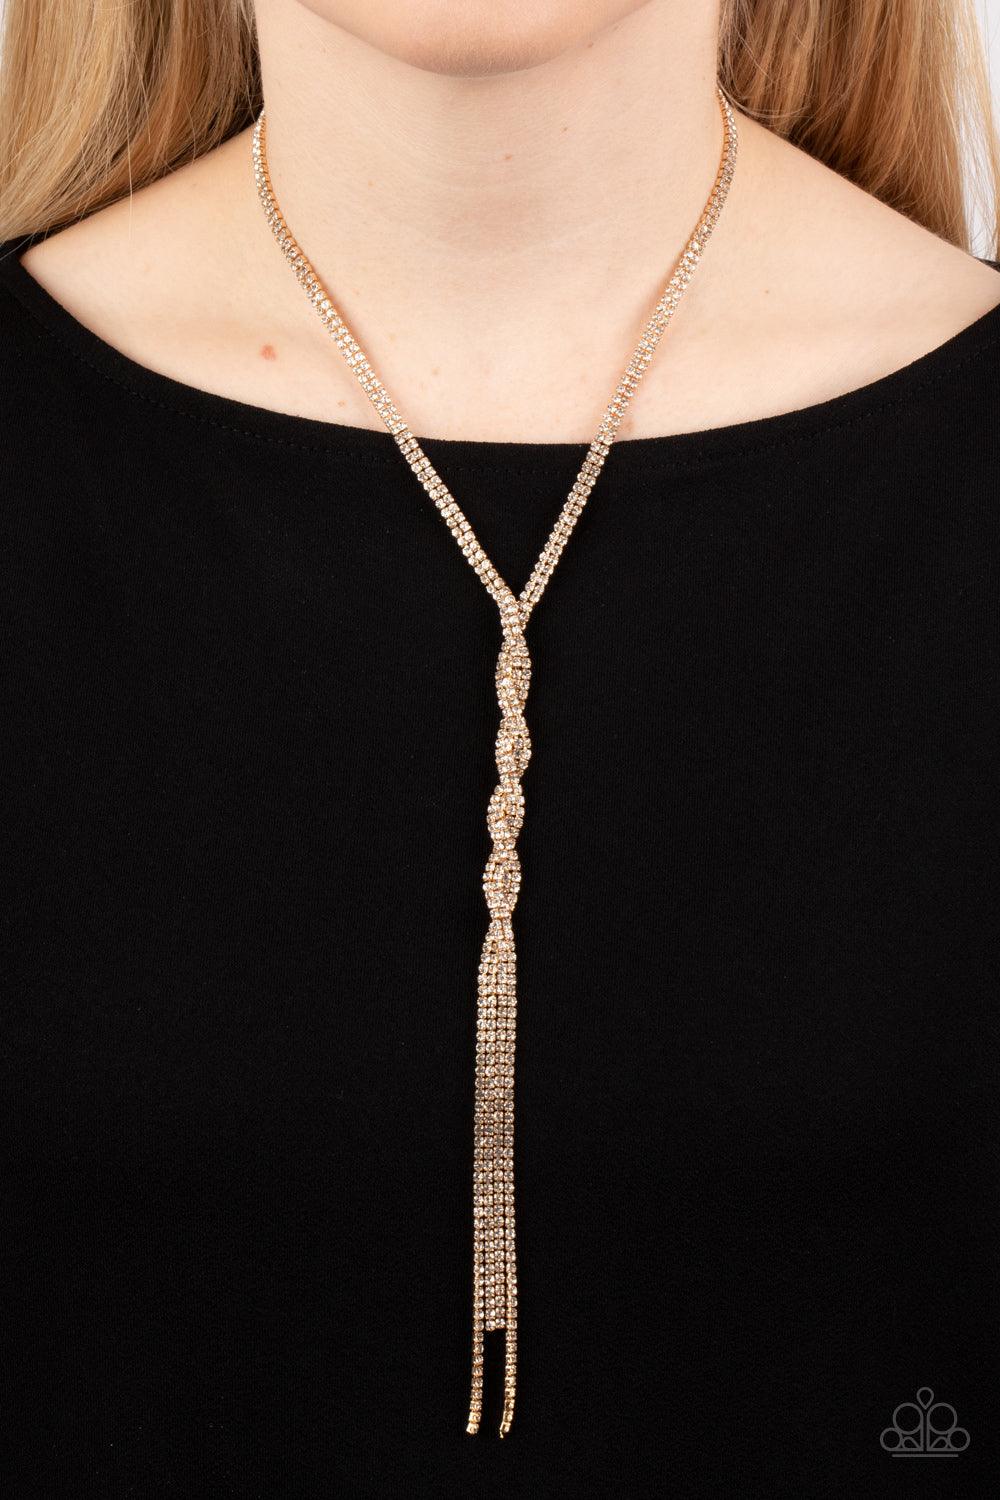 Impressively Icy Gold Necklace - Jewelry by Bretta